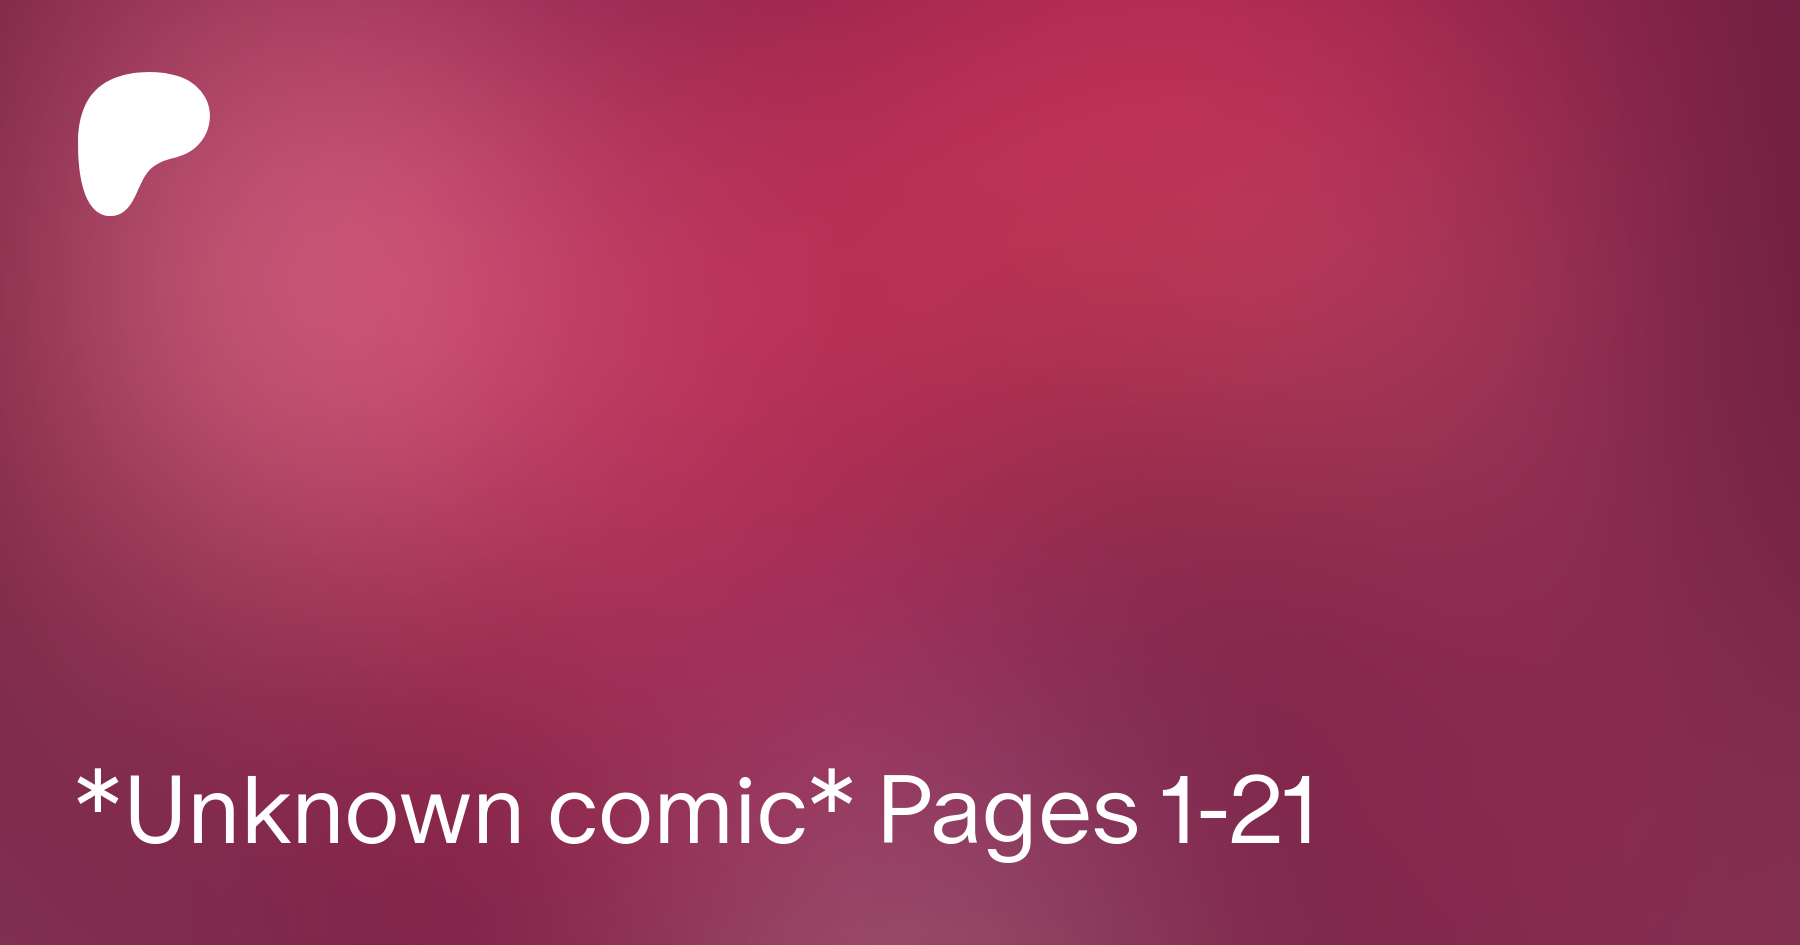 Unknown comic* Pages 1-21 | Patreon